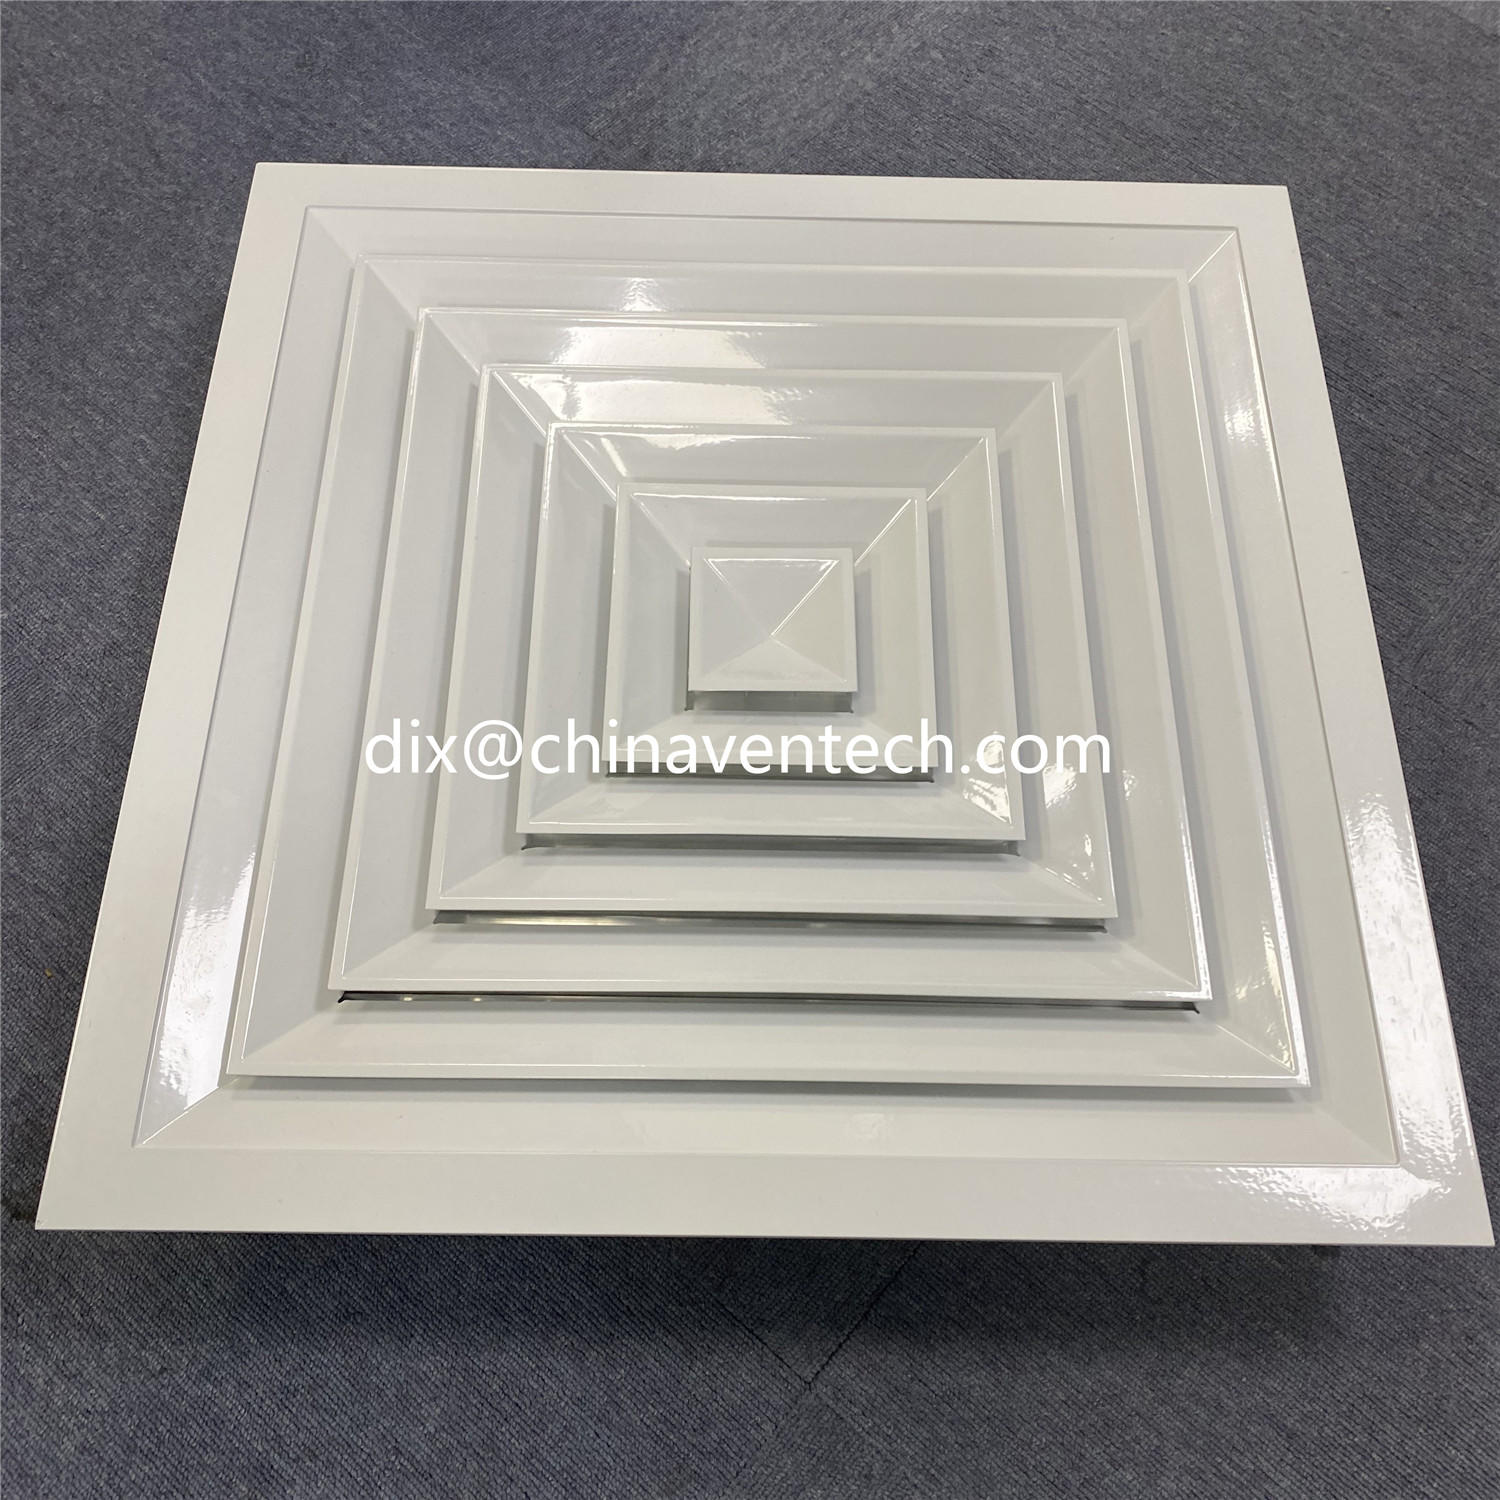 HVAC air conditioning ceiling ventilation square supply air 4 way directional diffuser